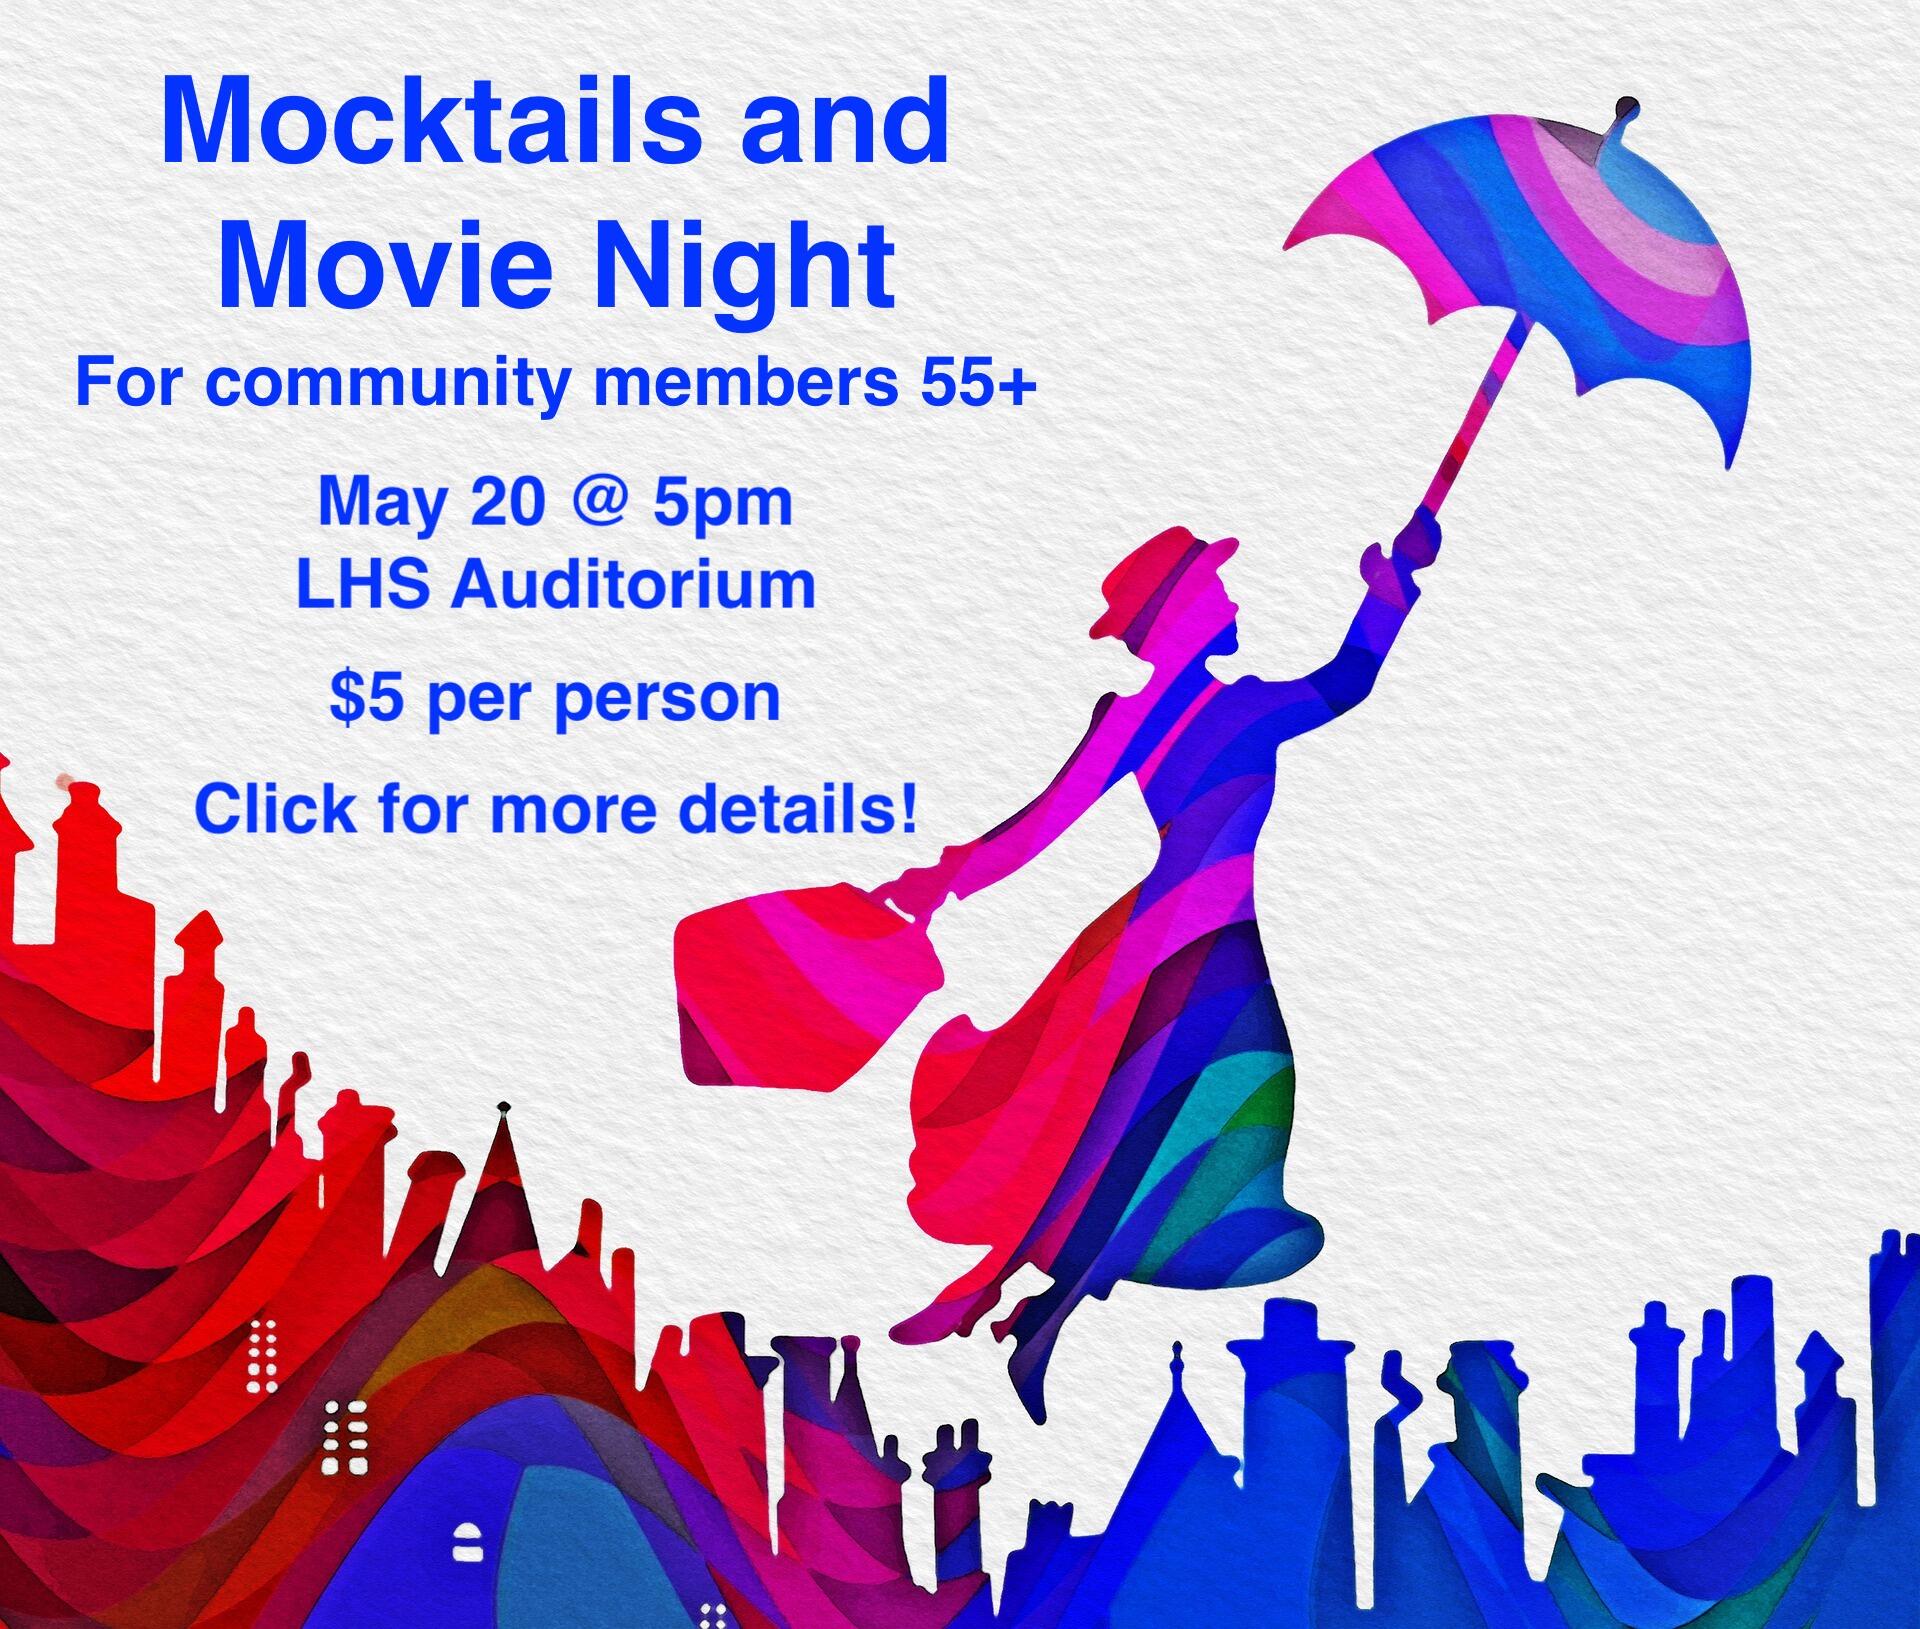 Mocktails and movie night May 20 at LHS